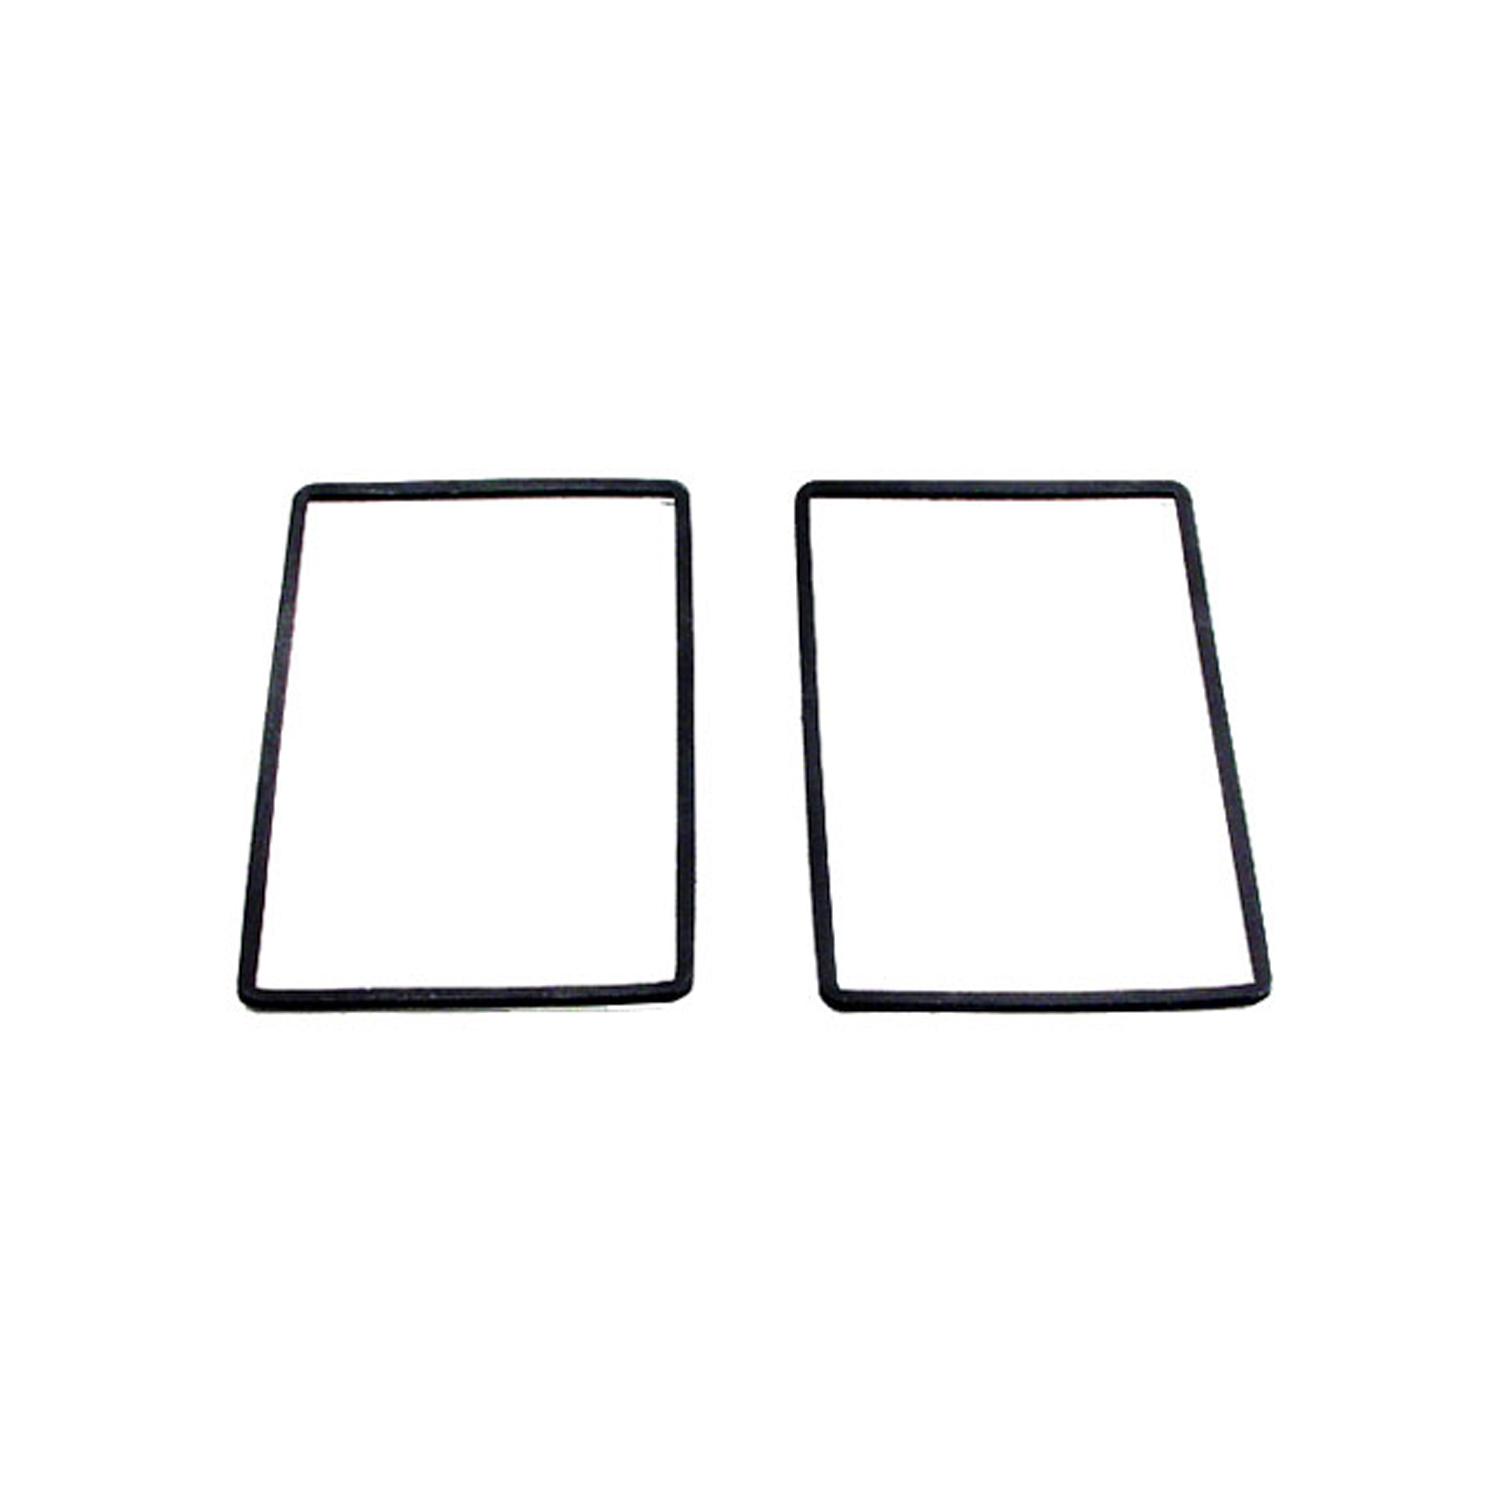 1952 Willys Station Wagon Tail-light Bezel Lens Gaskets.  2-3/4 X 2-5/16.  Pair-LG 9600-120